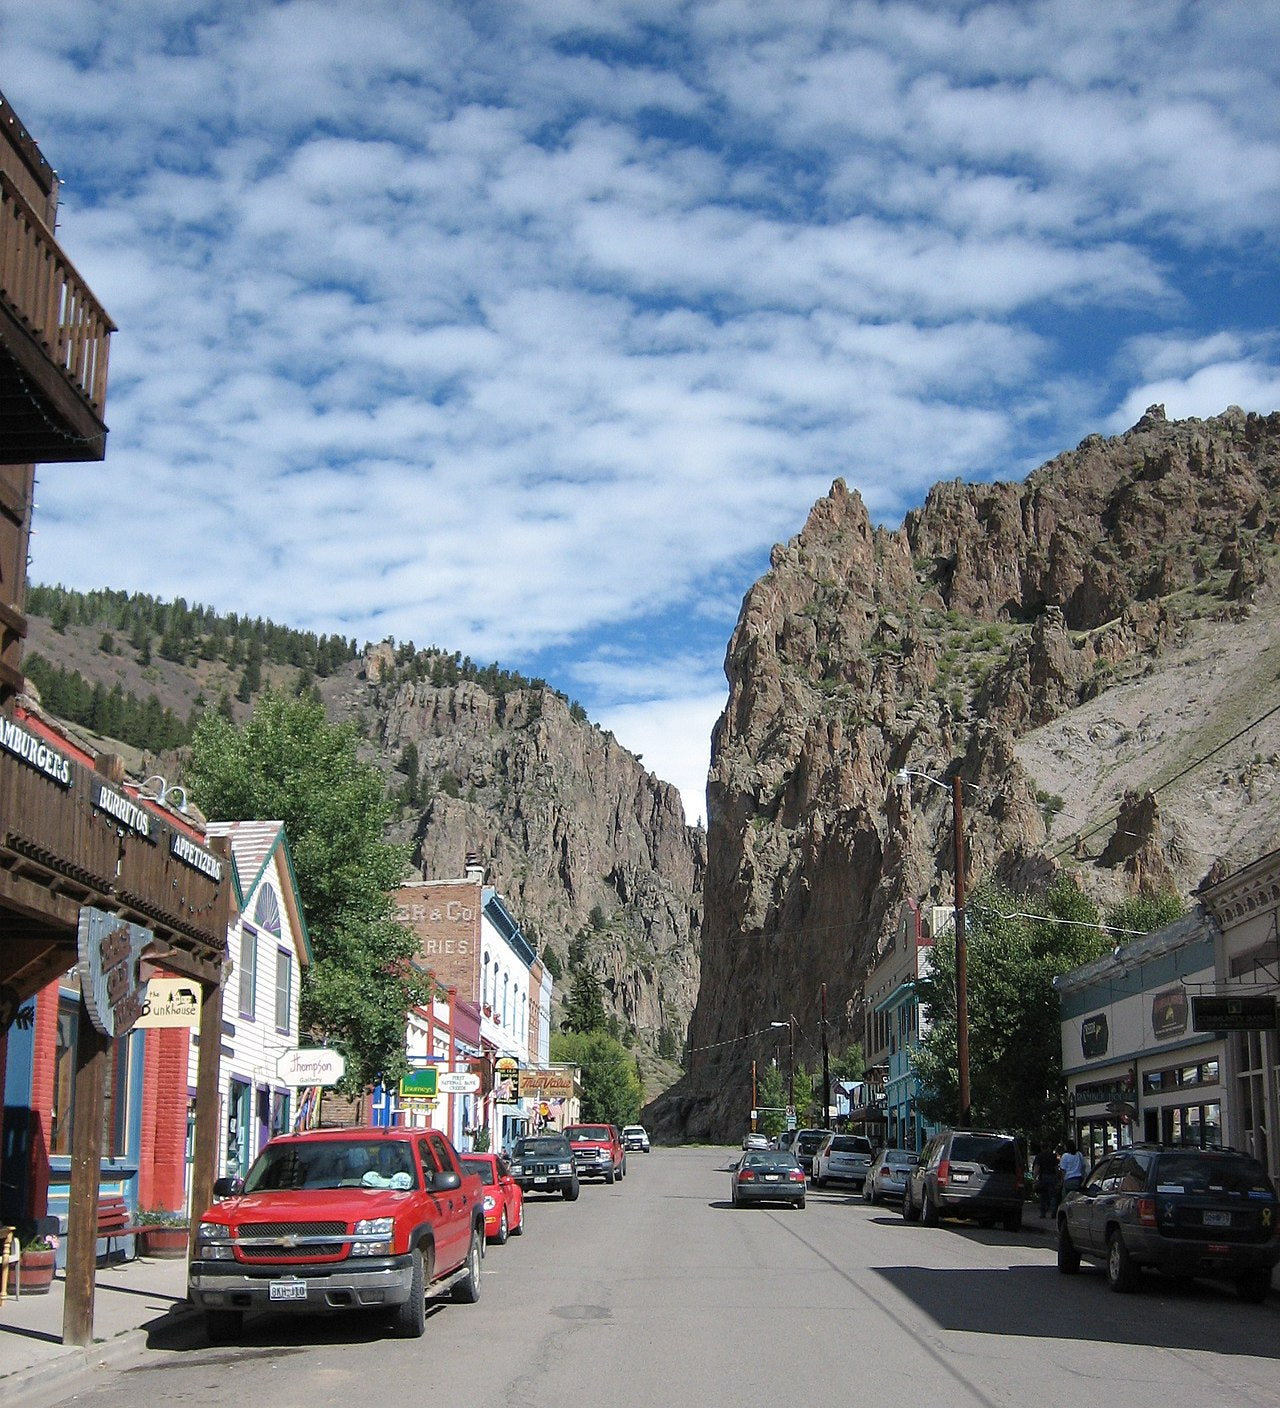 Haus and Hues in Creede